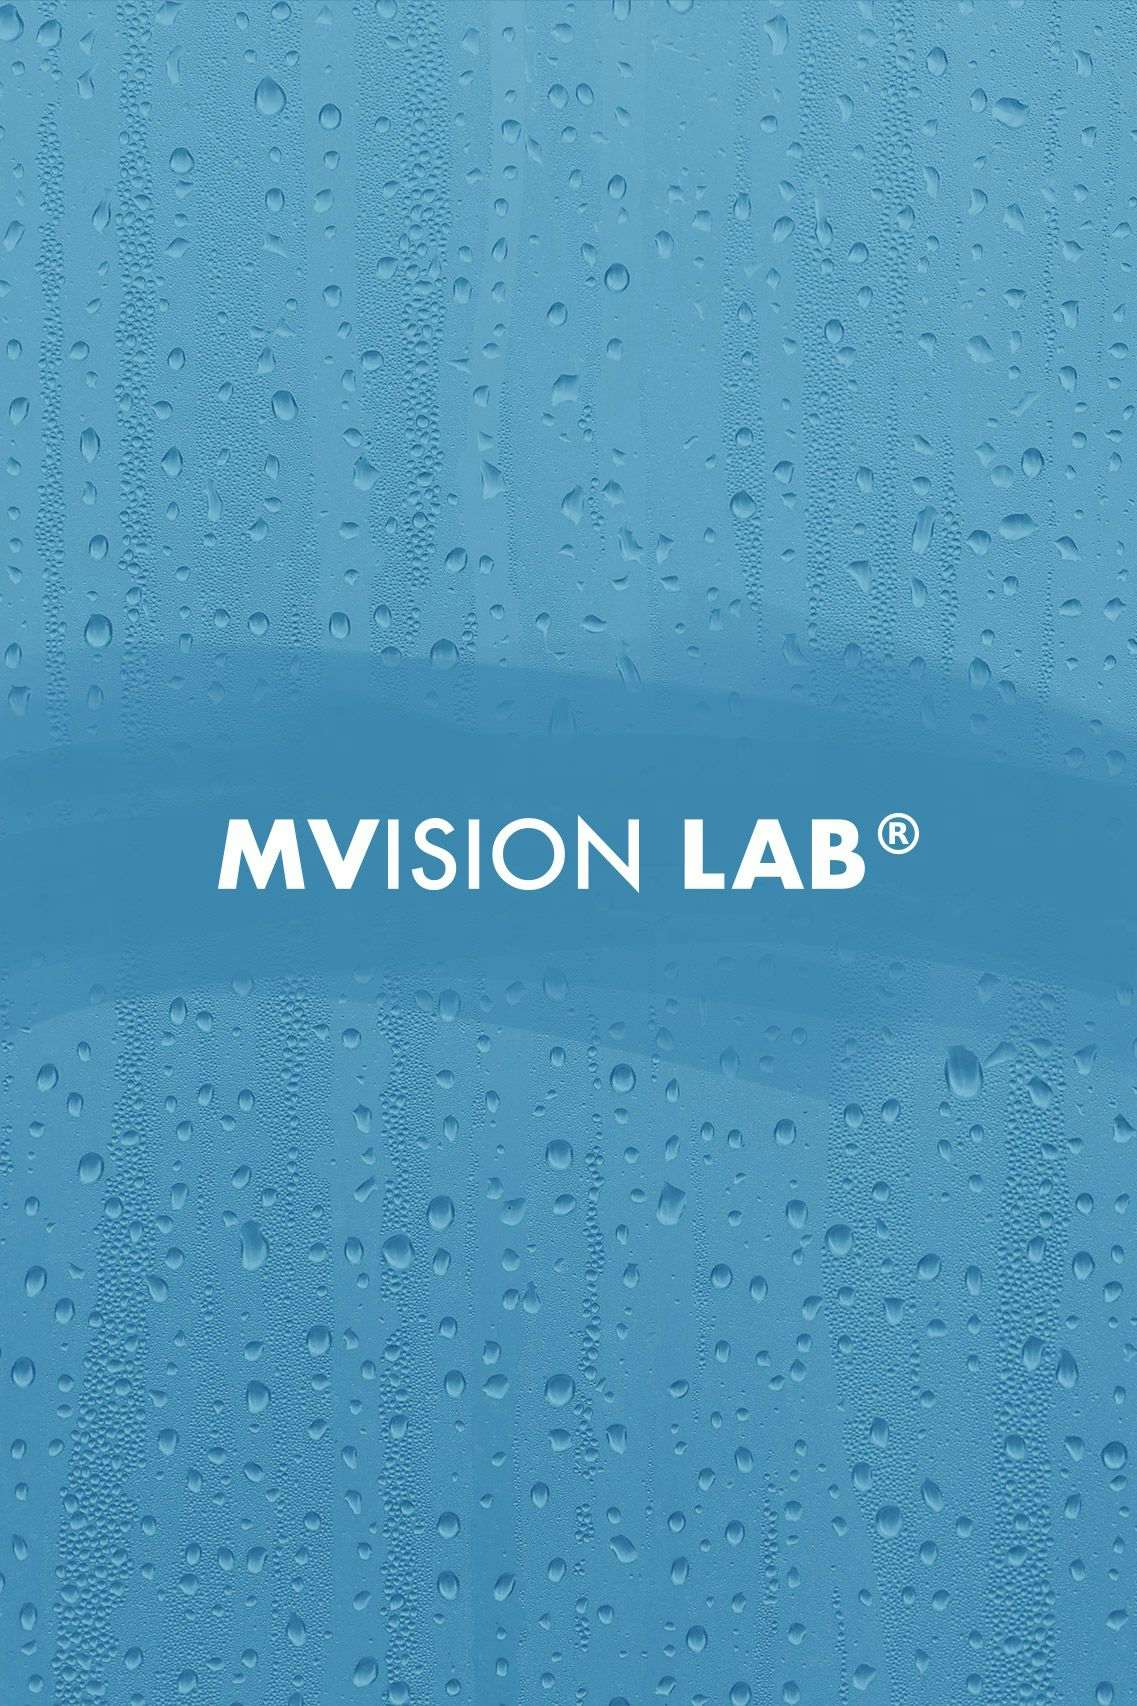 MVision Lab project hero image hinting at their innovative anti-fog products 